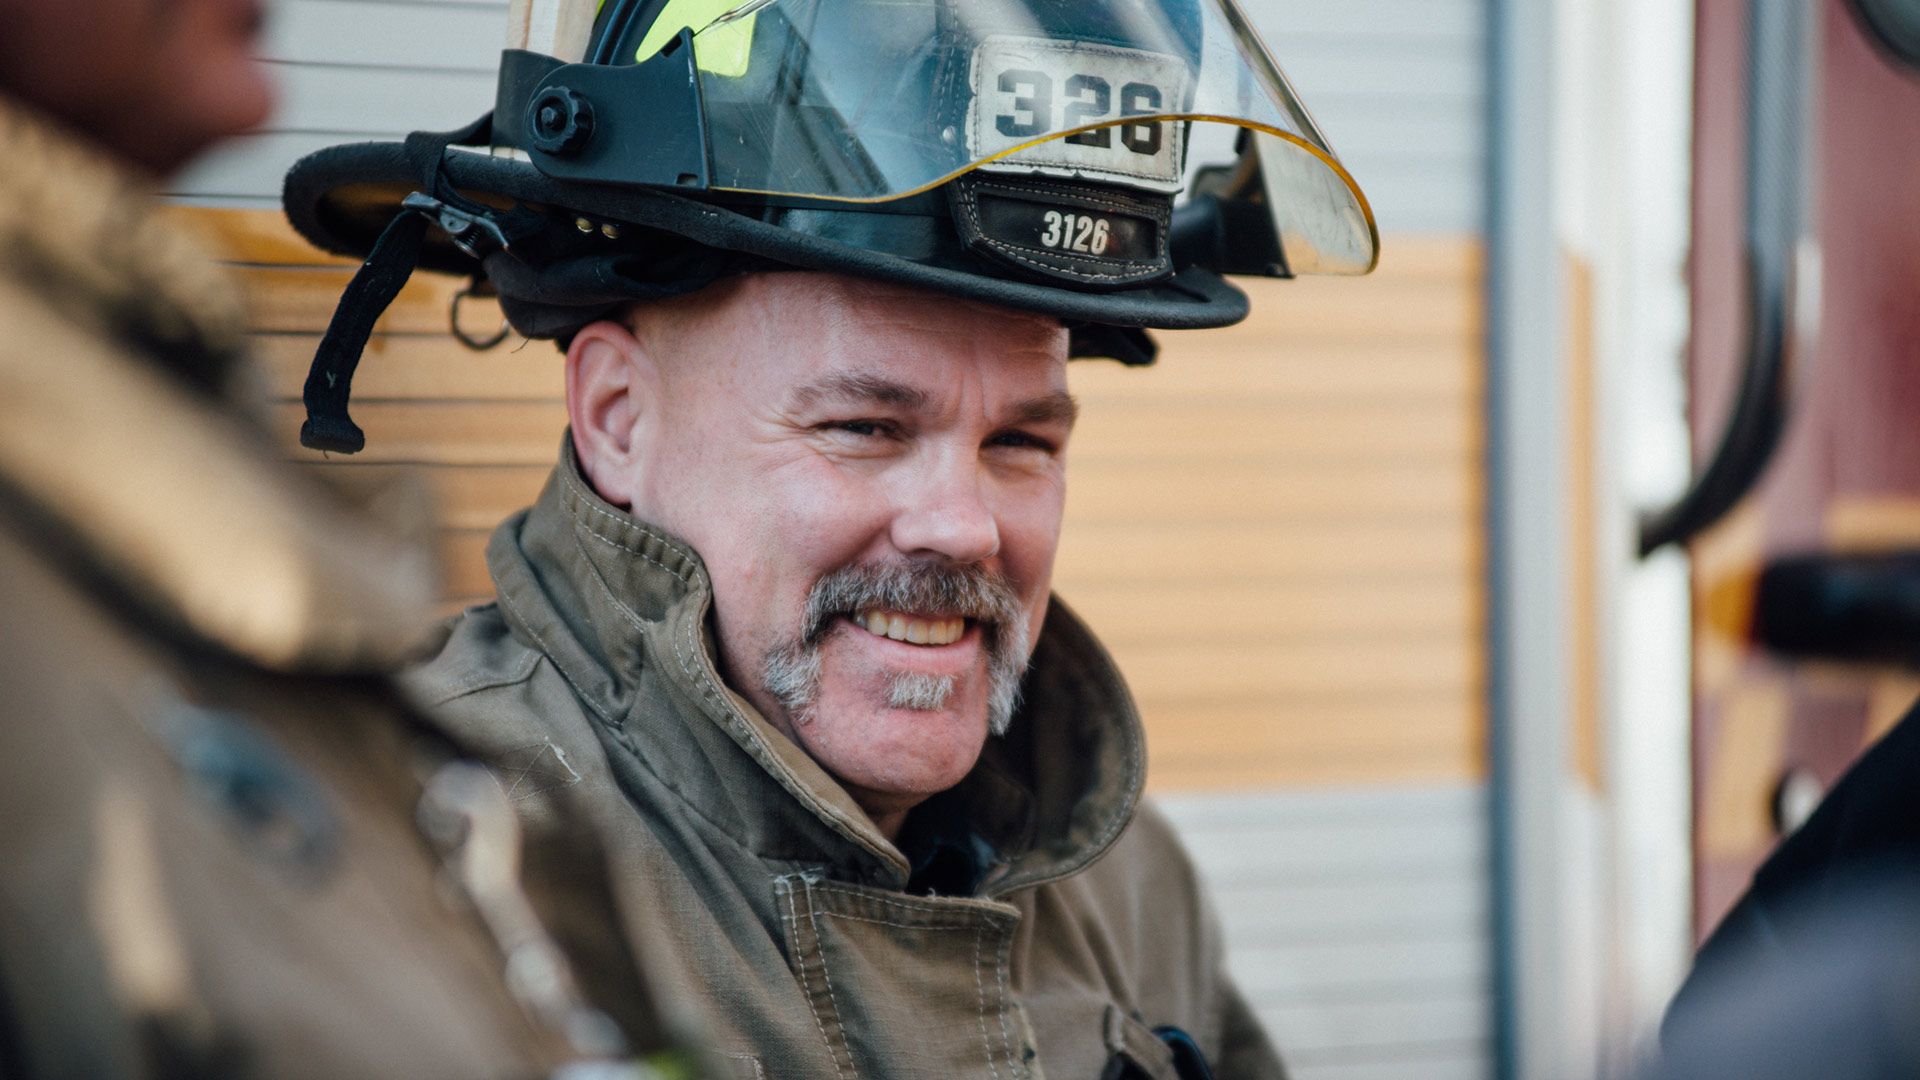 An image of a firefighter with an epic moustache smiling